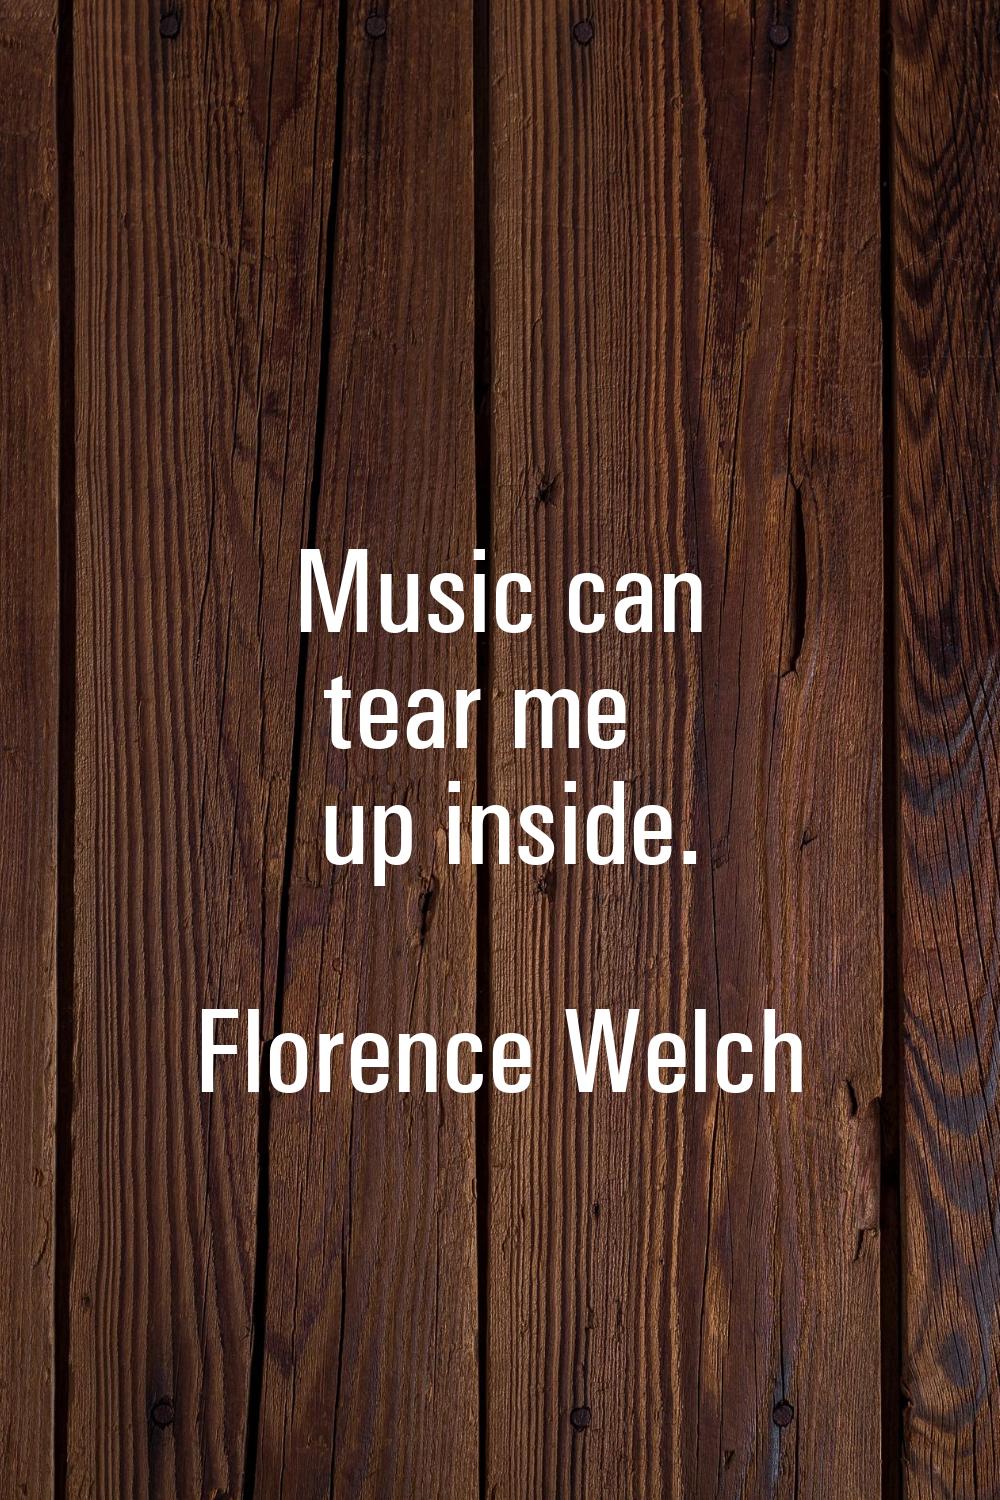 Music can tear me up inside.